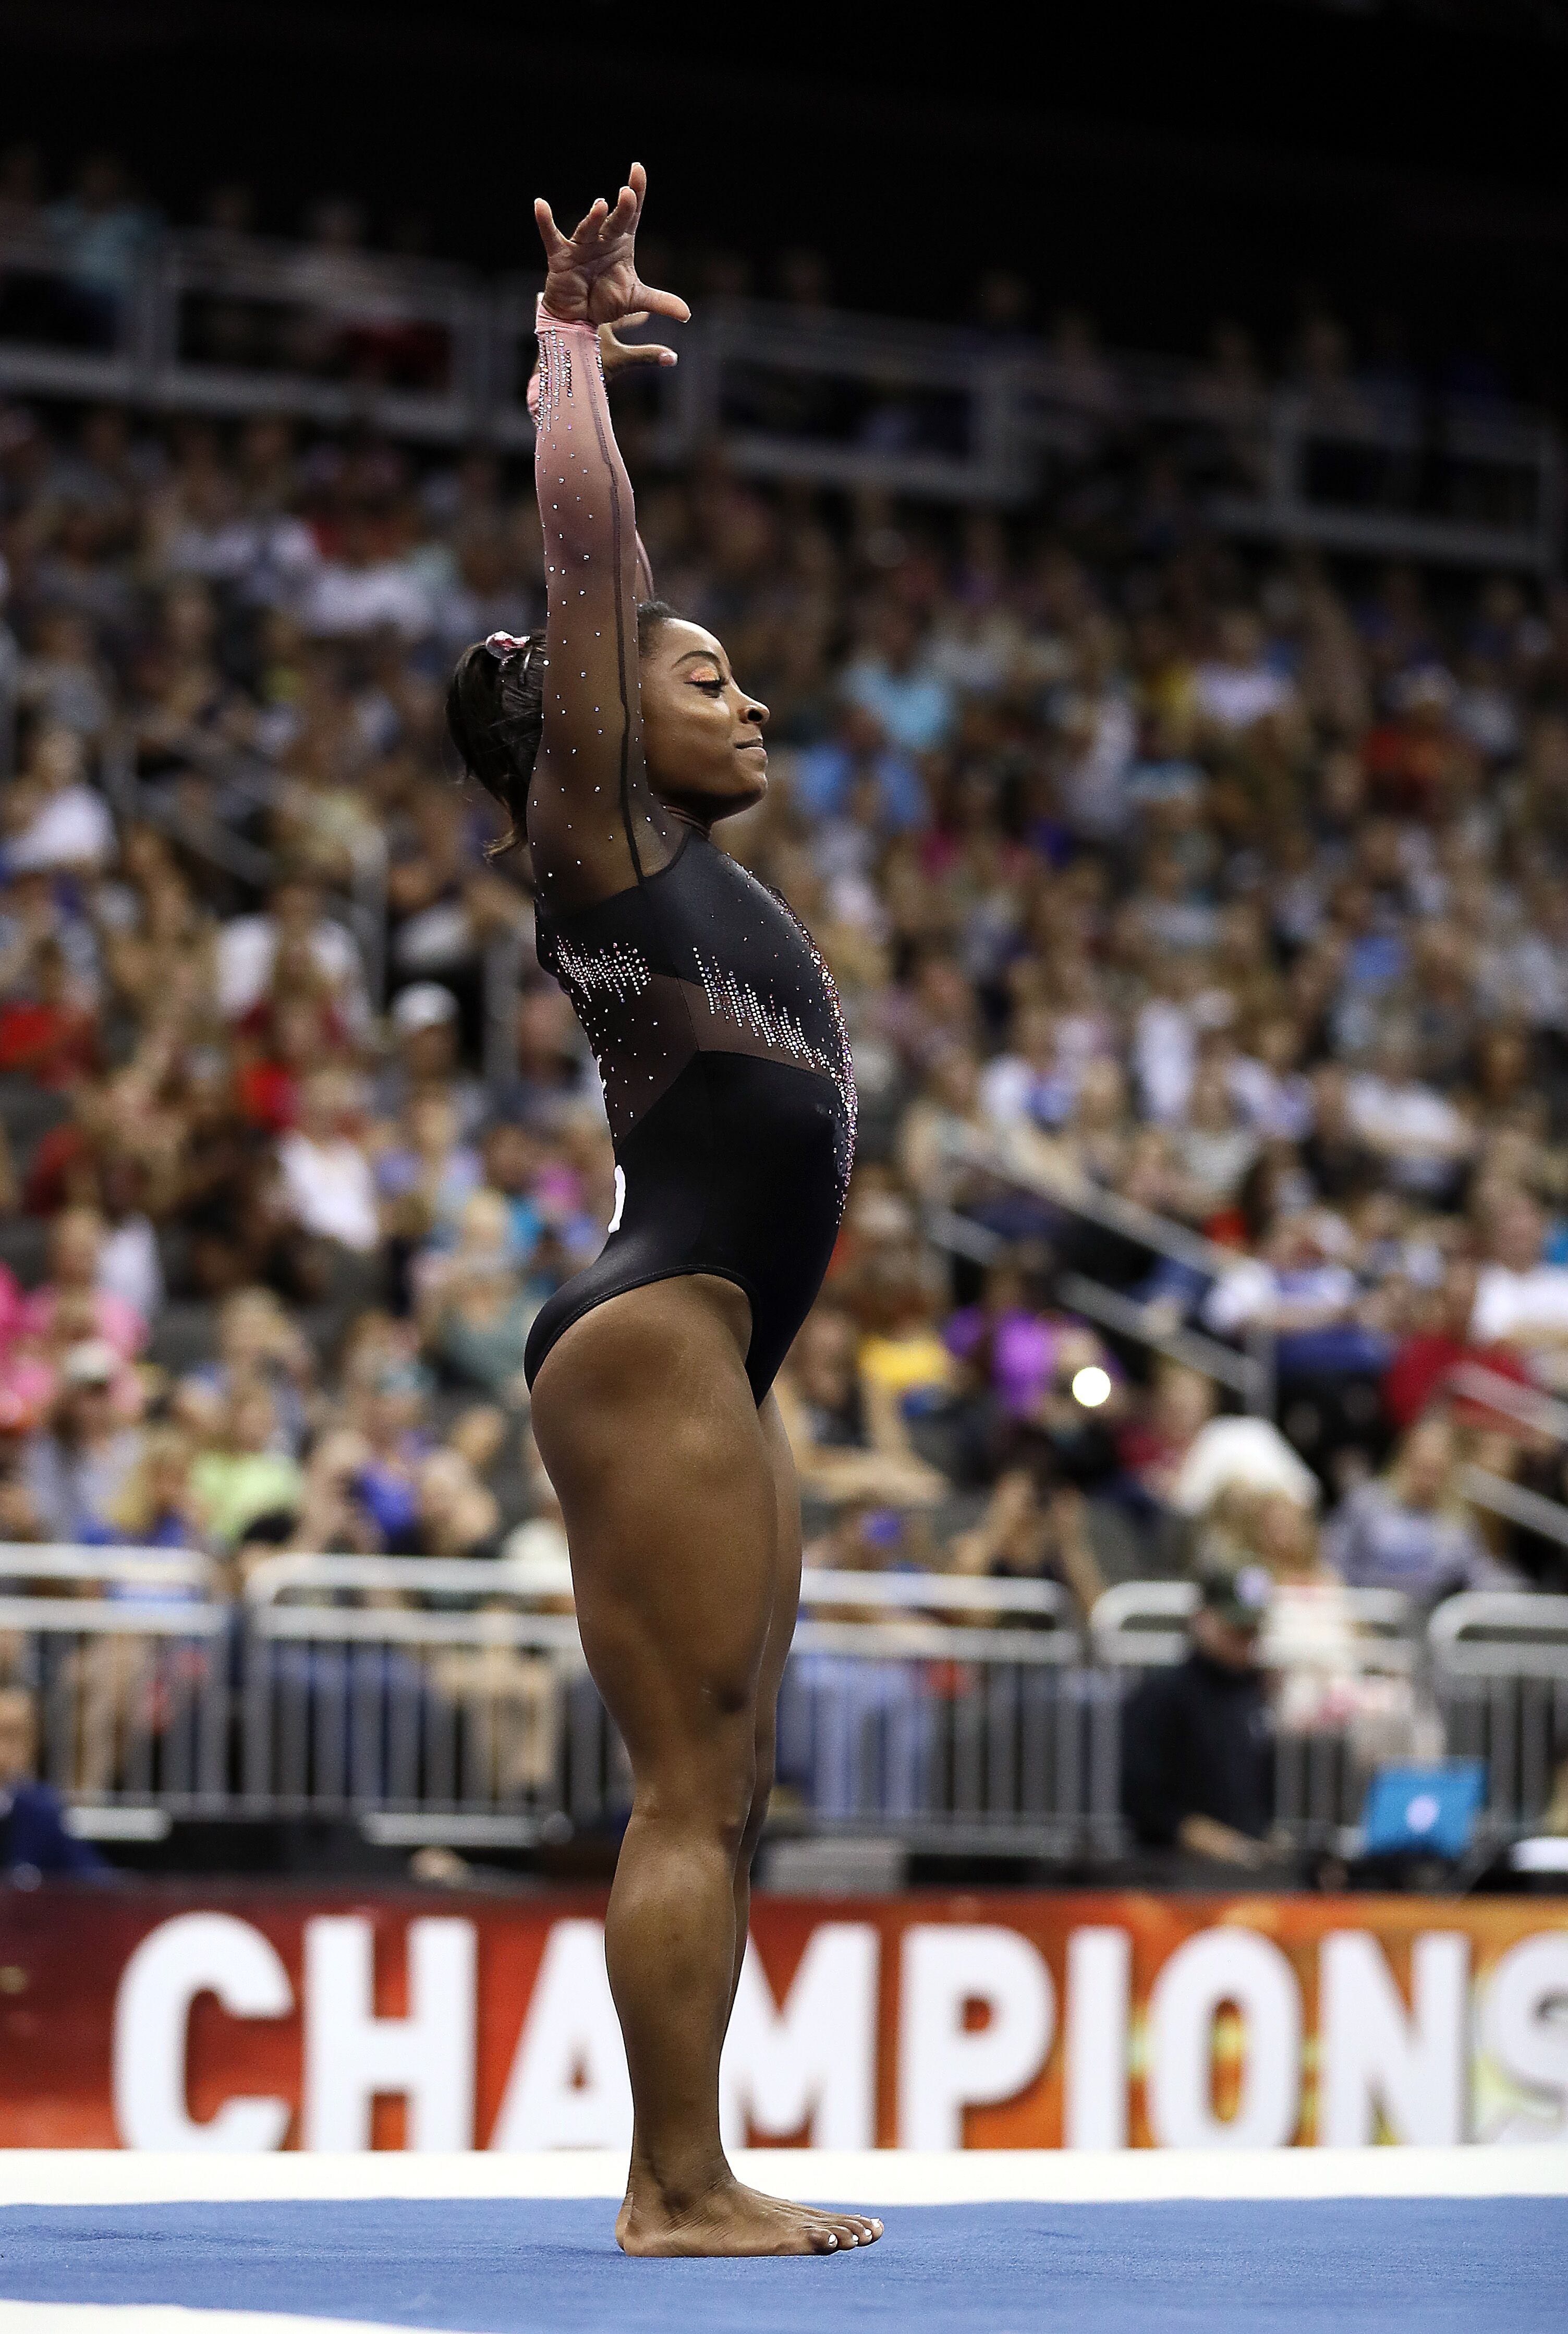 Simone Biles competes on floor exercise during Women's Senior competition of the 2019 U.S. Gymnastics Championships at the Sprint Center on August 11, 2019. | Photo: Getty Images